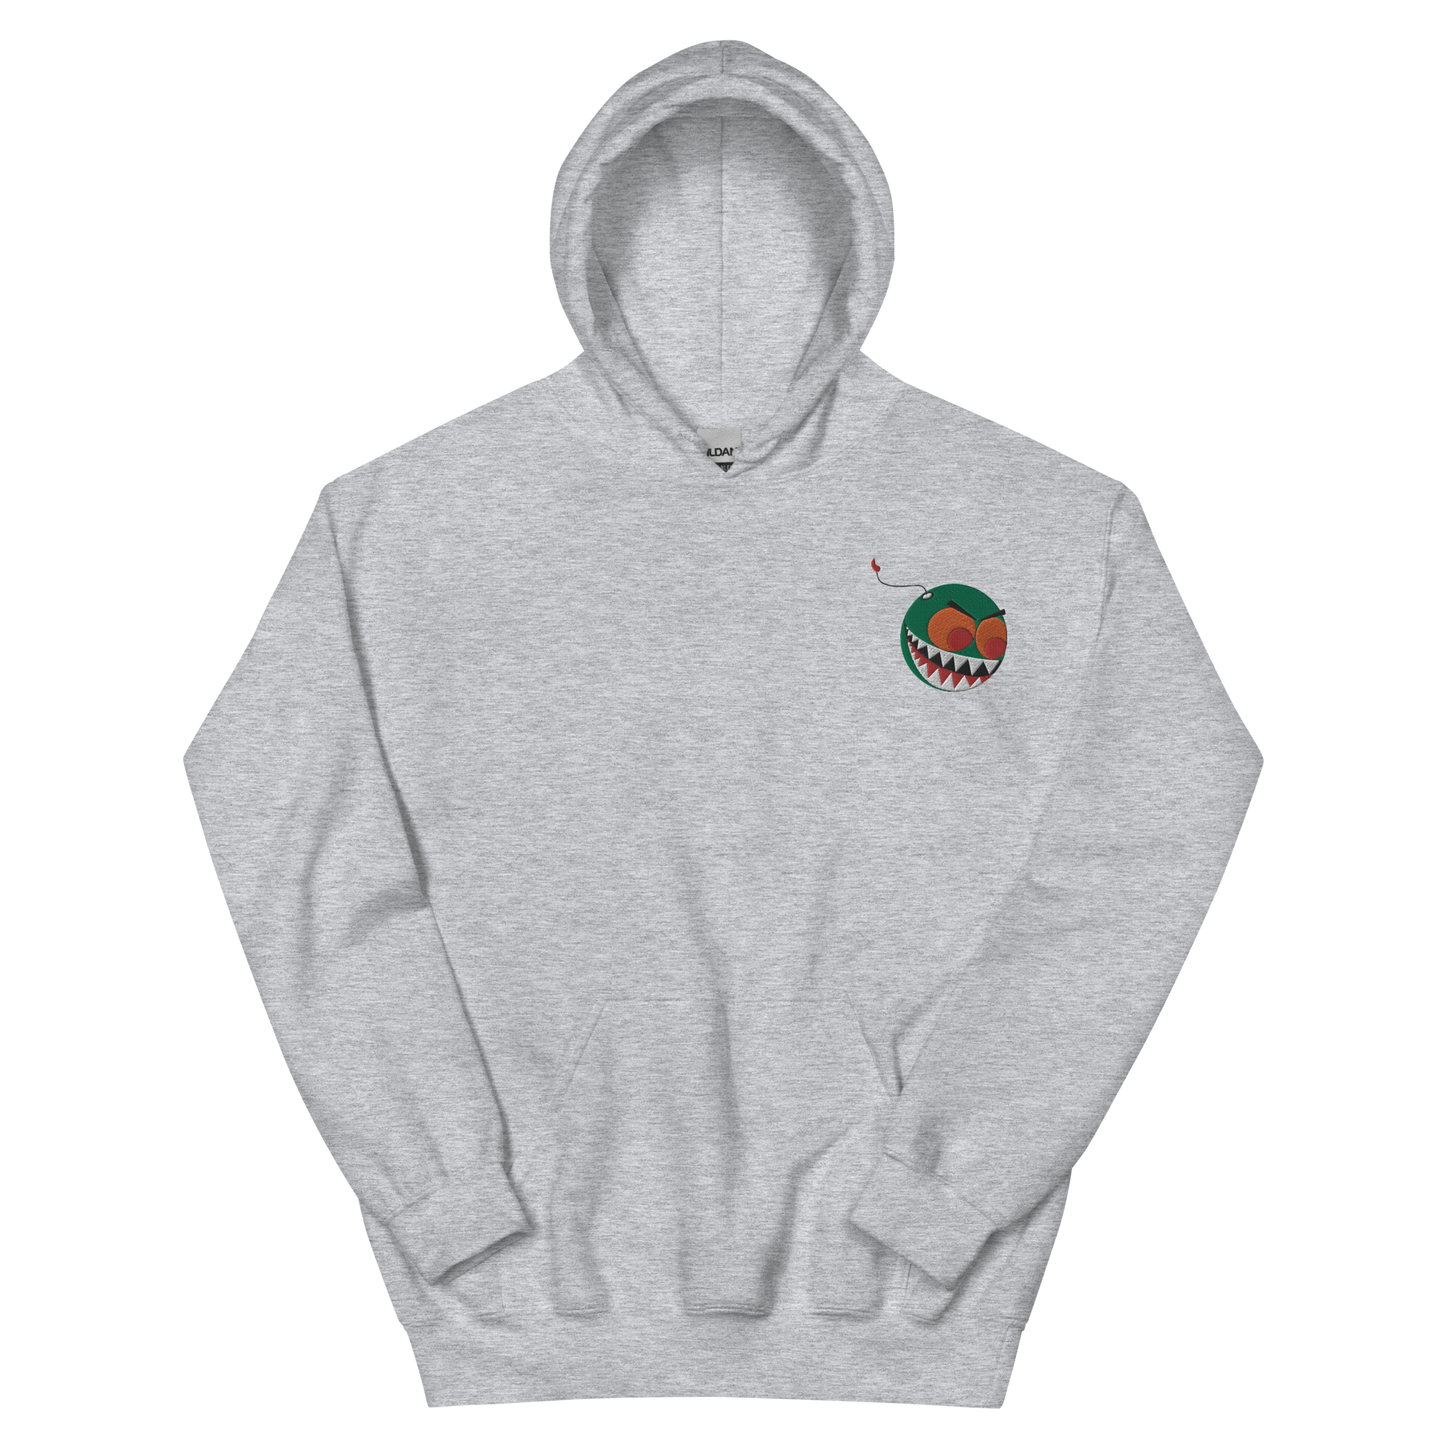 DIRTY BOMB EMBROIDERED LOGO HOODIE